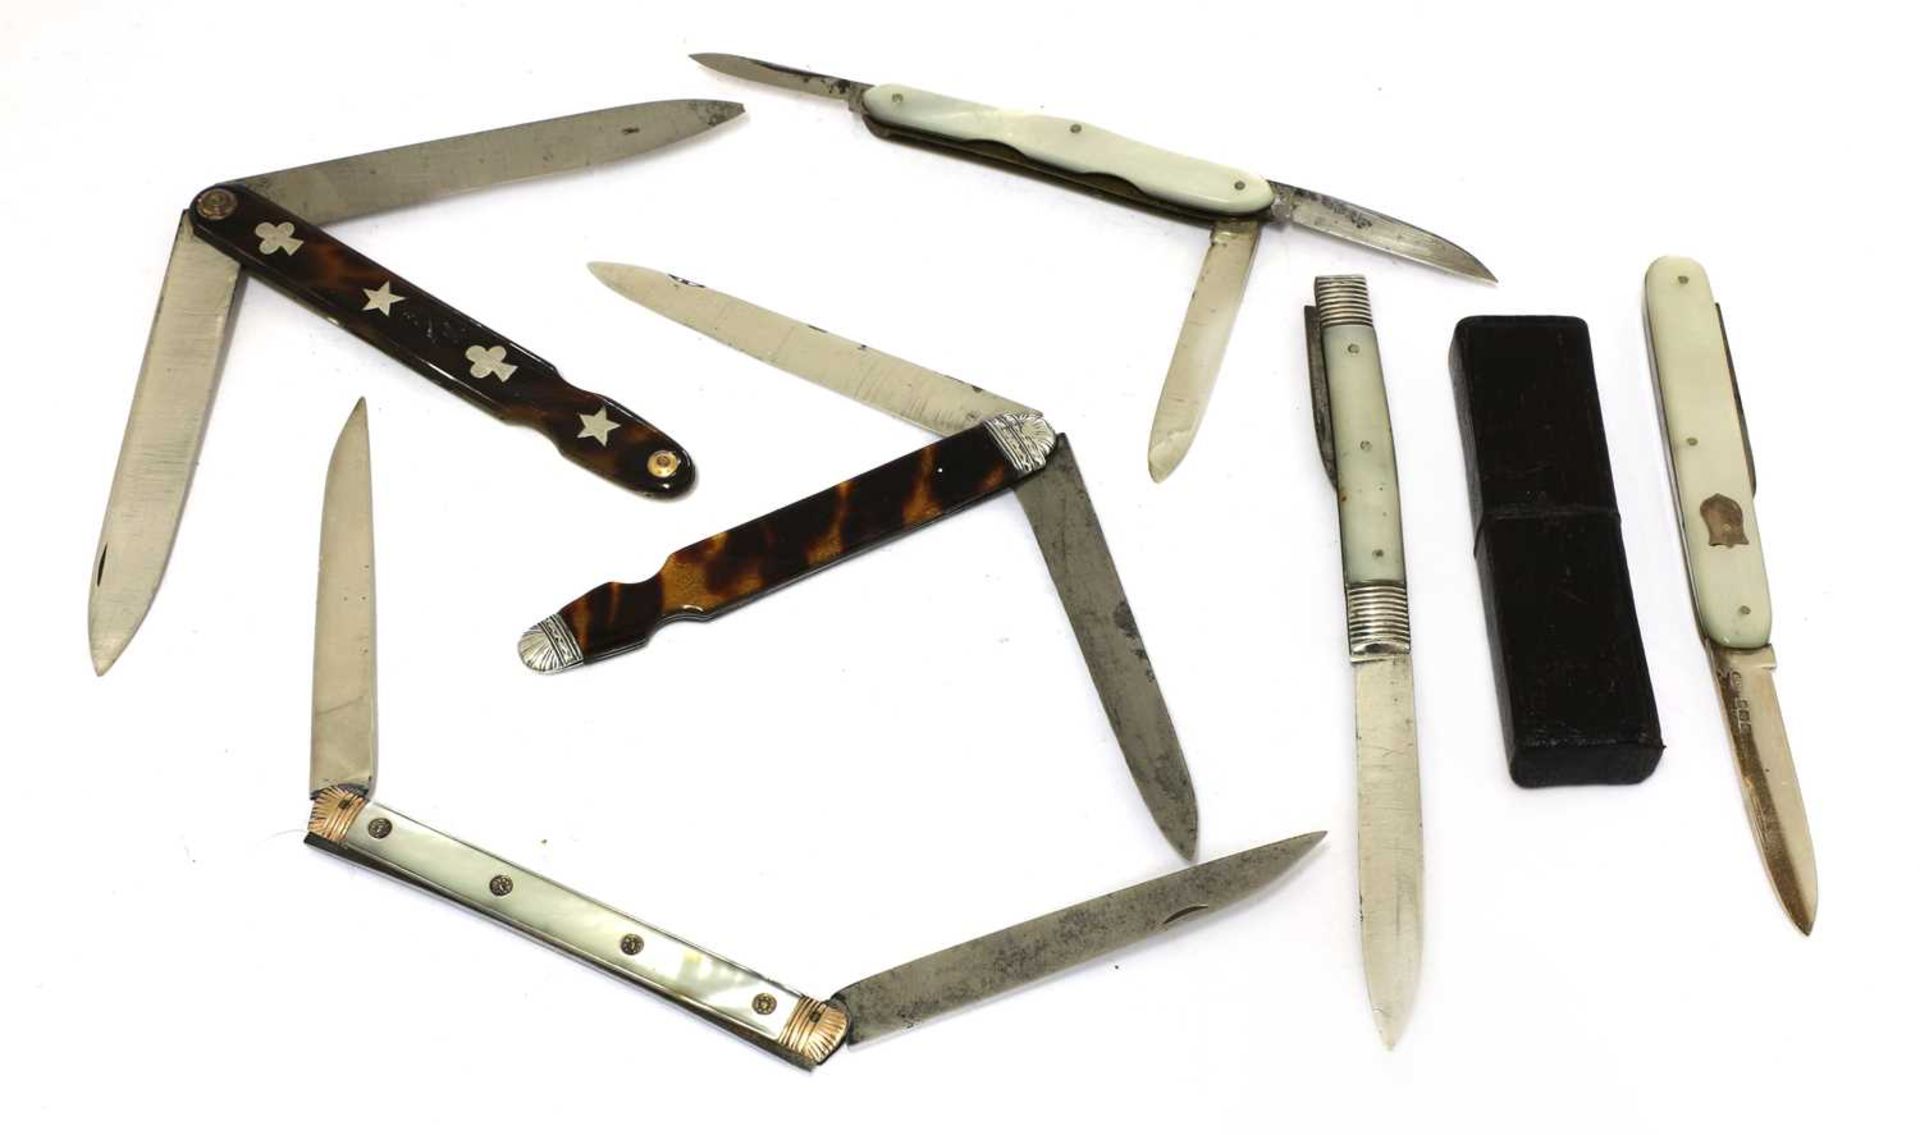 Six folding fruit knives with double blades